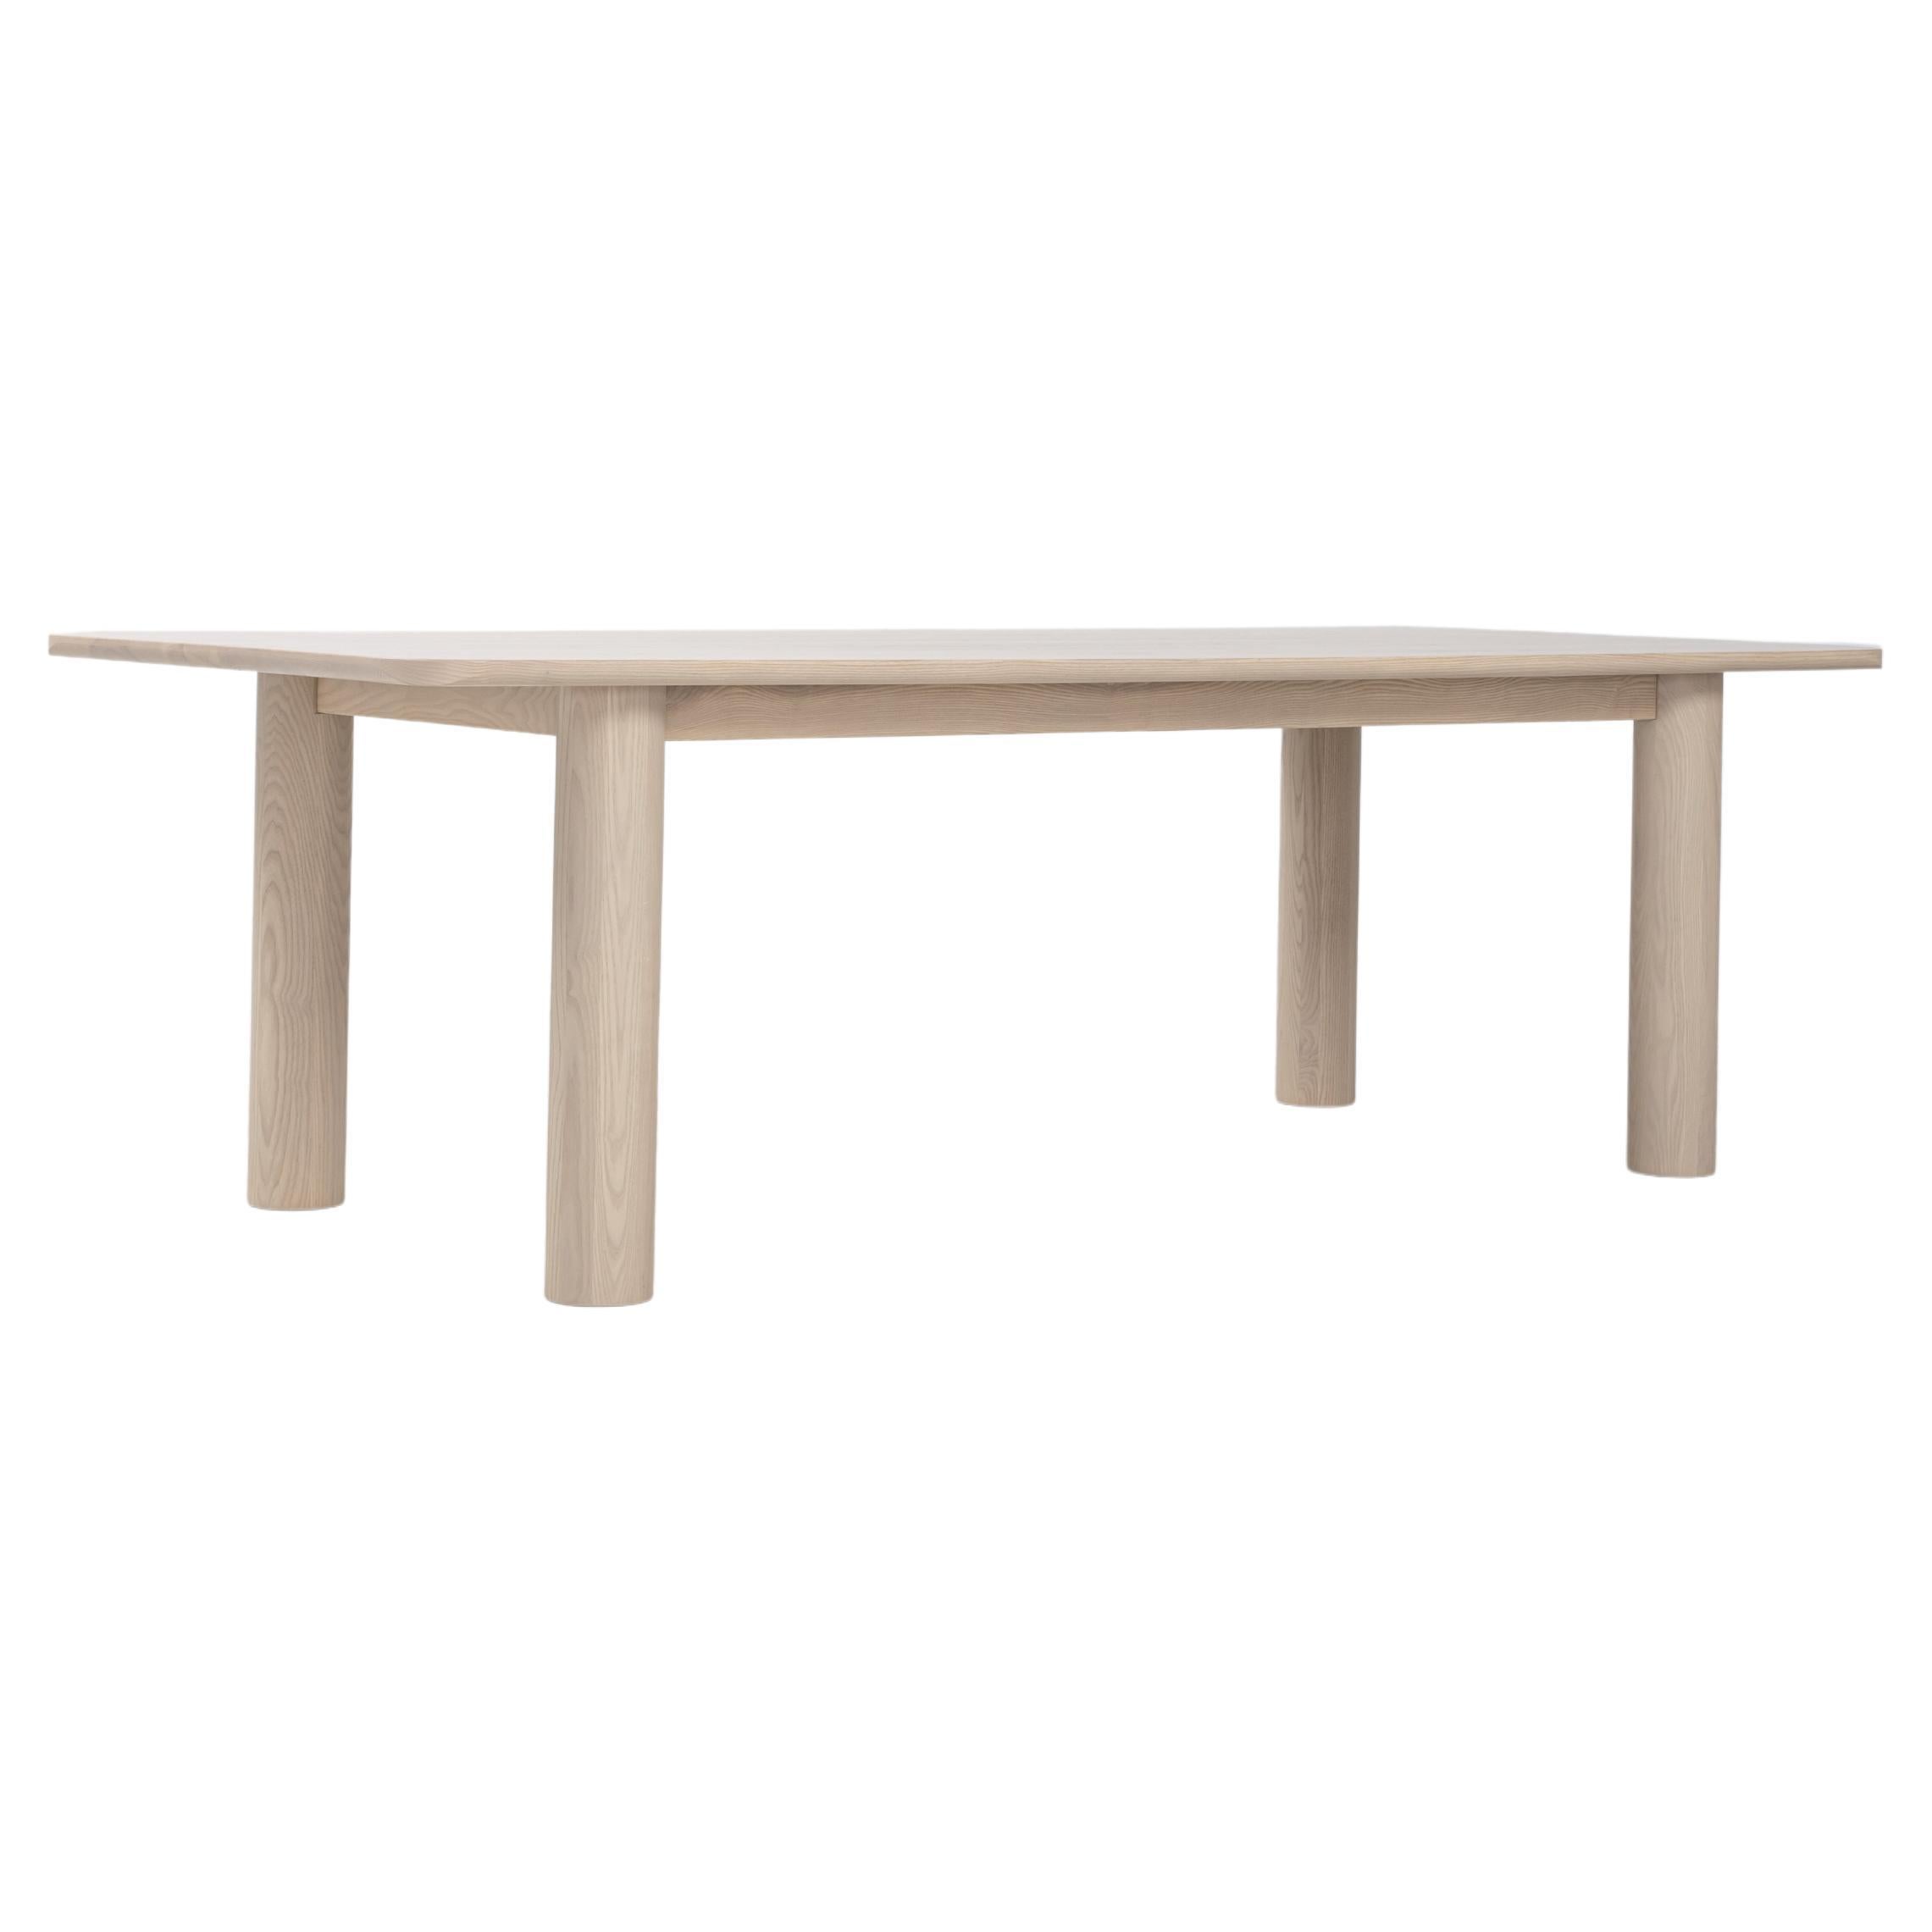 Arc Dining Table 98", Nude, Minimalist Dining Table in FSC White Ash Wood